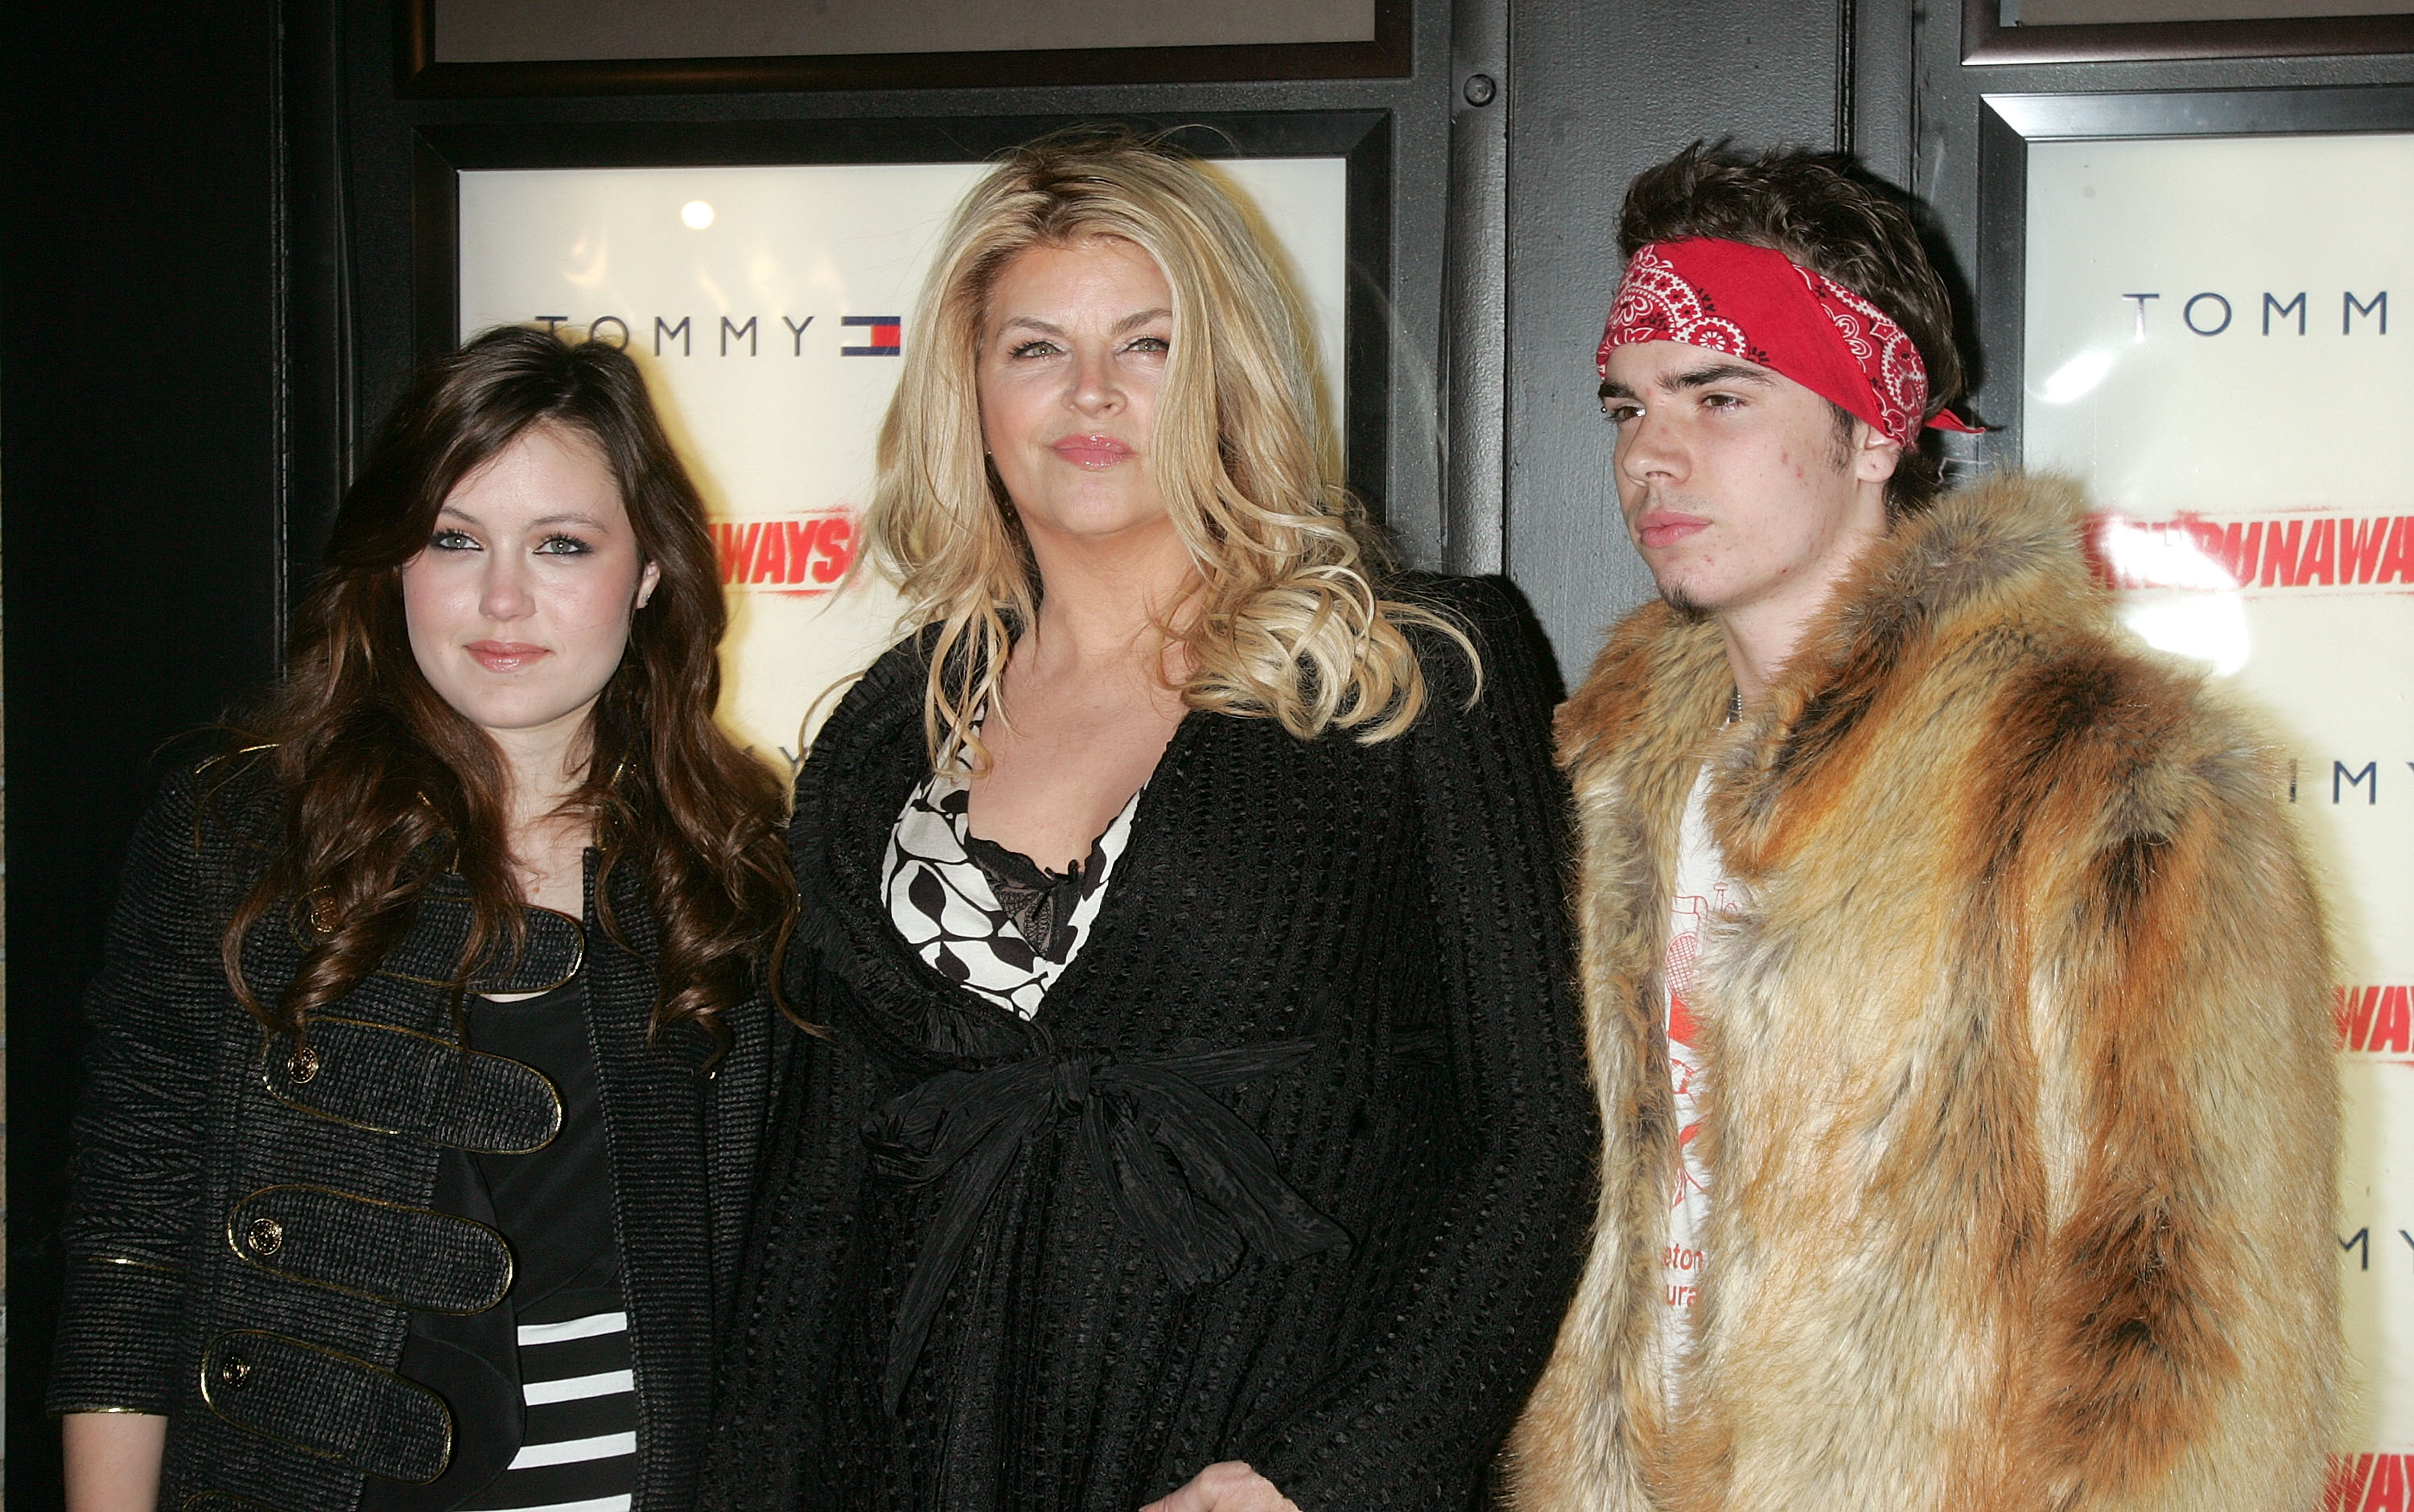 Lillie Price, Kirstie Alley, and William True at the "The Runaways" New York premiere at Landmark Sunshine Cinema in New York City on March 17, 2010. | Source: Getty Images